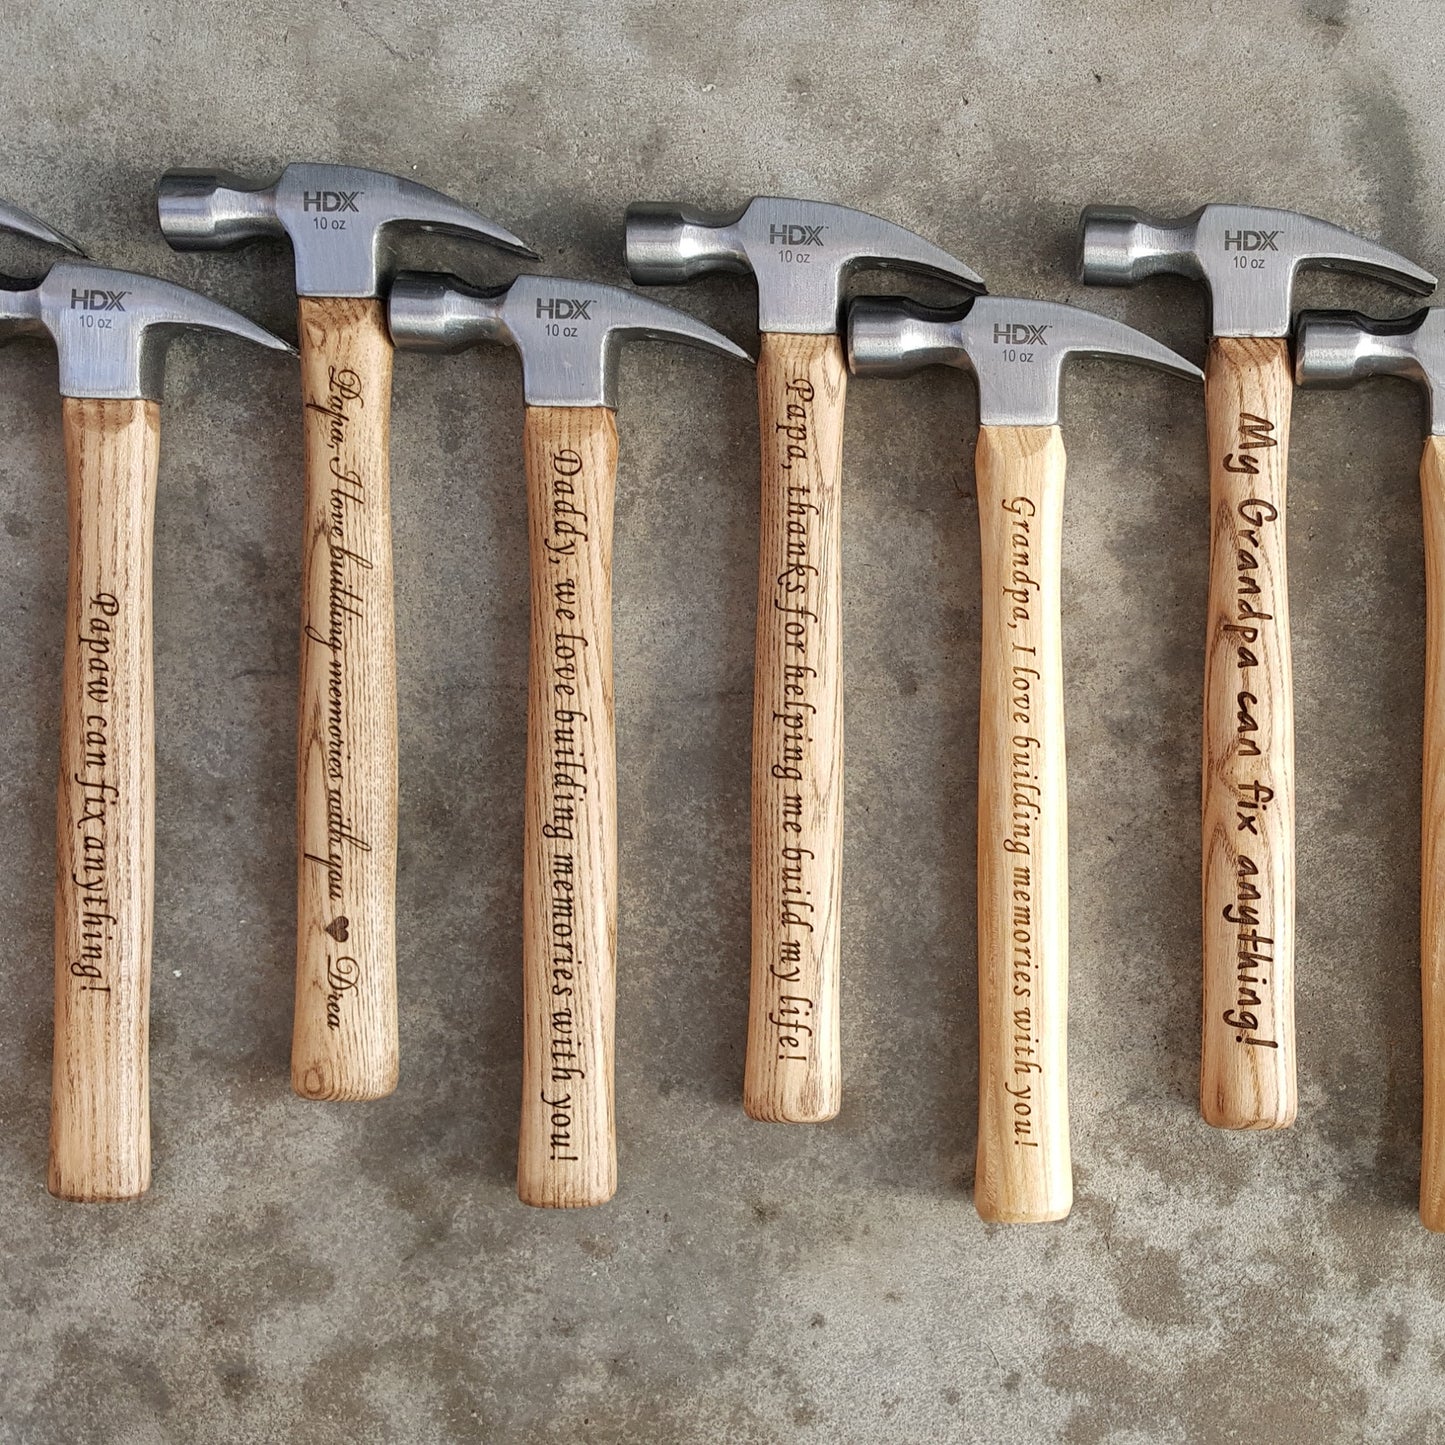 Engraved Hammer - Personalized Hammer with your quote or names